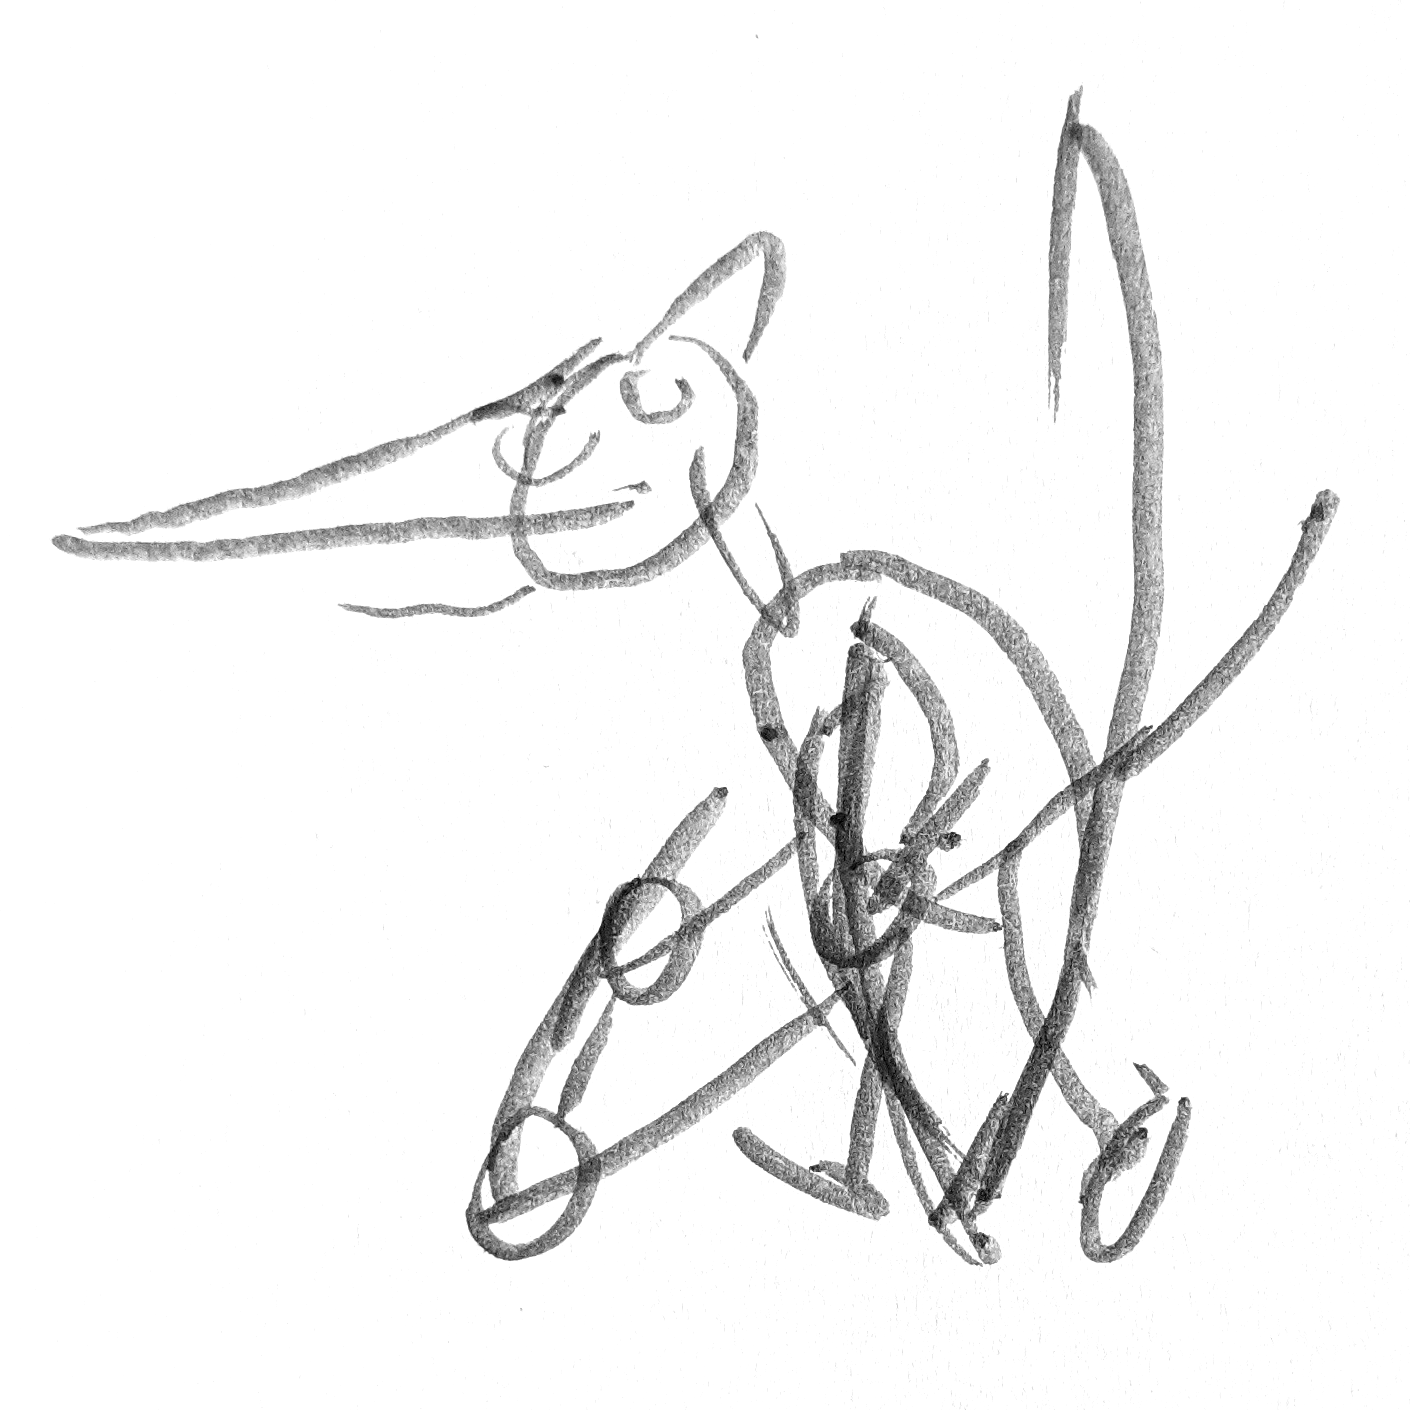 A Pteranodon drawing with slightly more detail